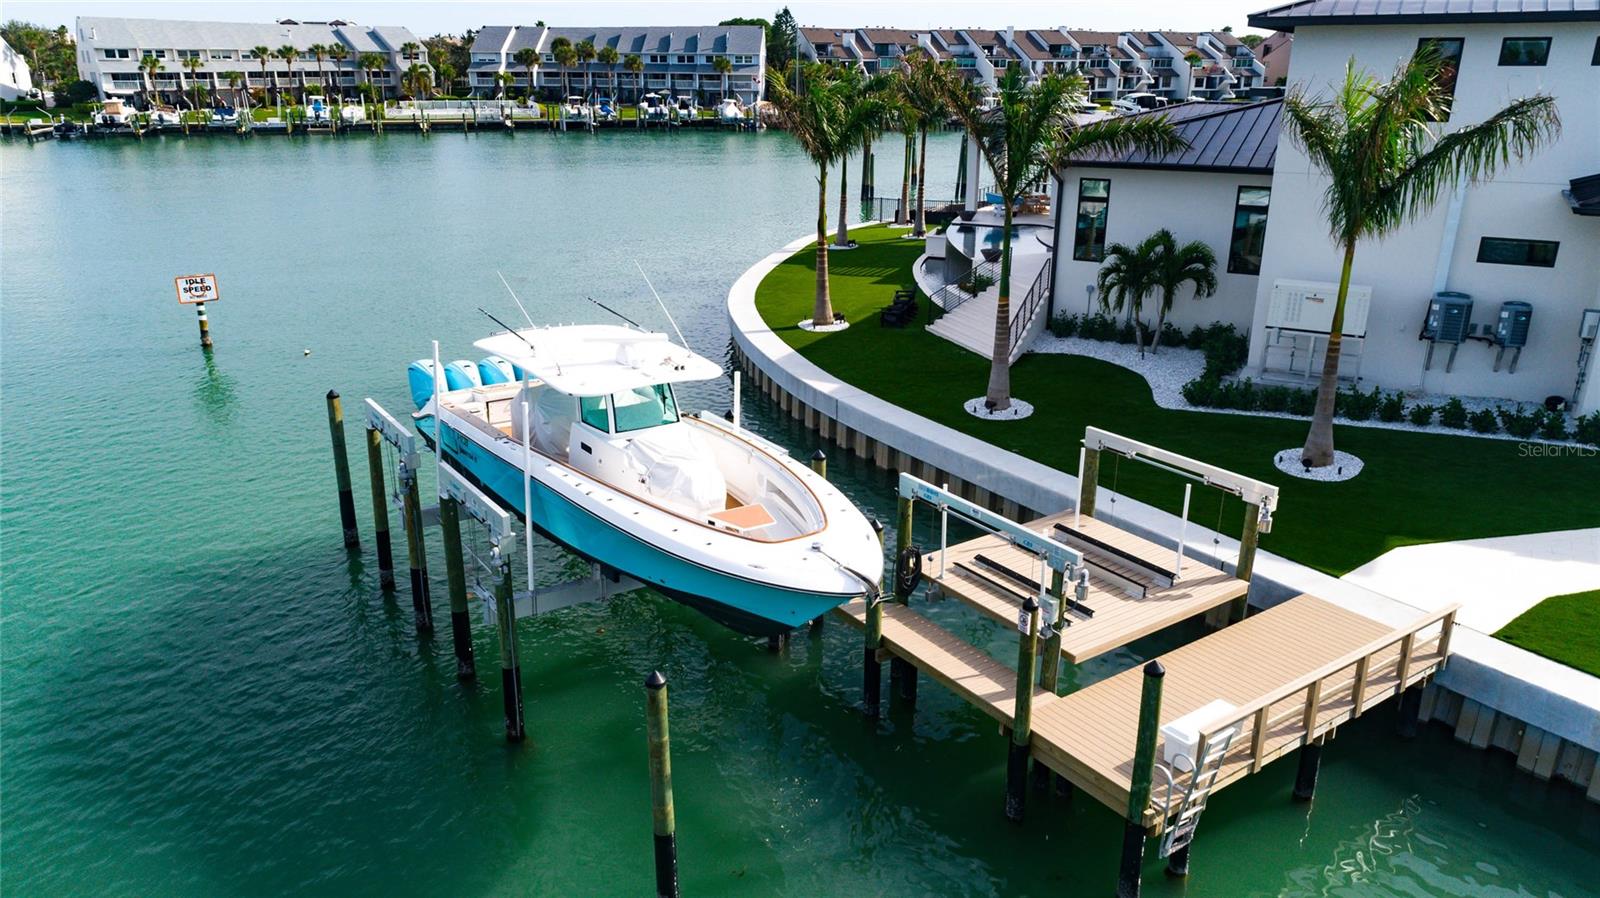 2 Boat Lifts: 1one accommodating a pair of Jet Skis and another robust 40,000-pound lift designed for a 52-foot boat.